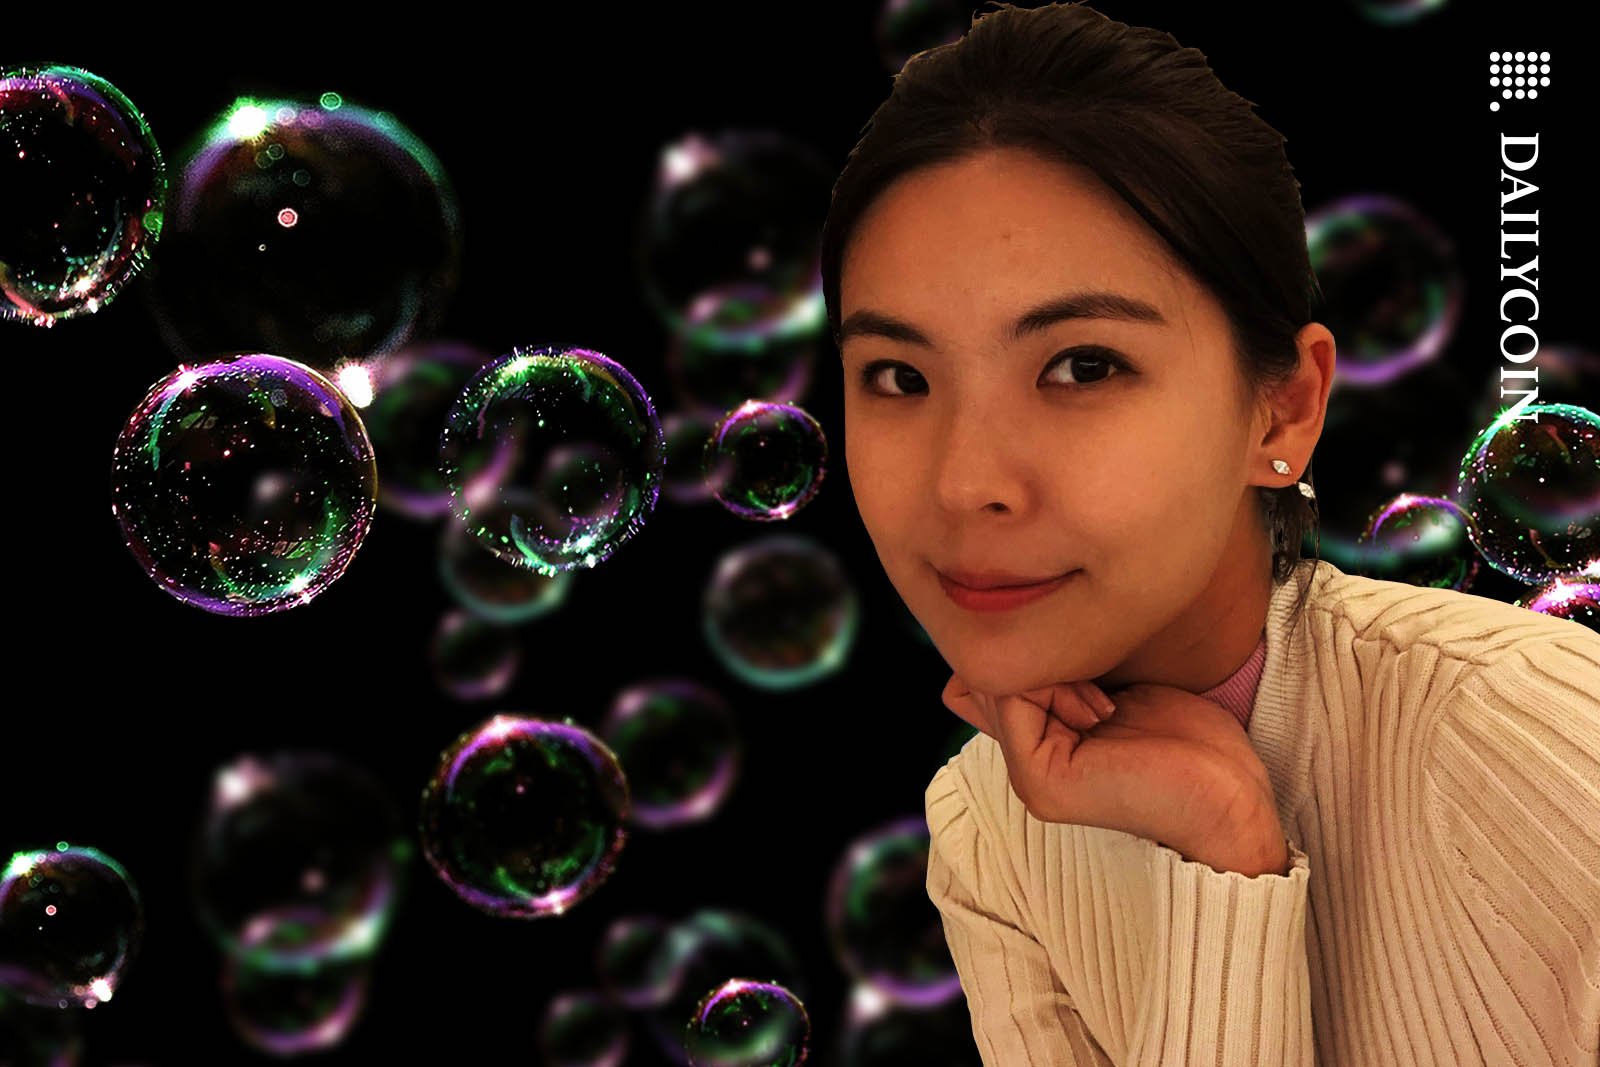 Gracy Chen with a smile, surrounded by soap bubbles.